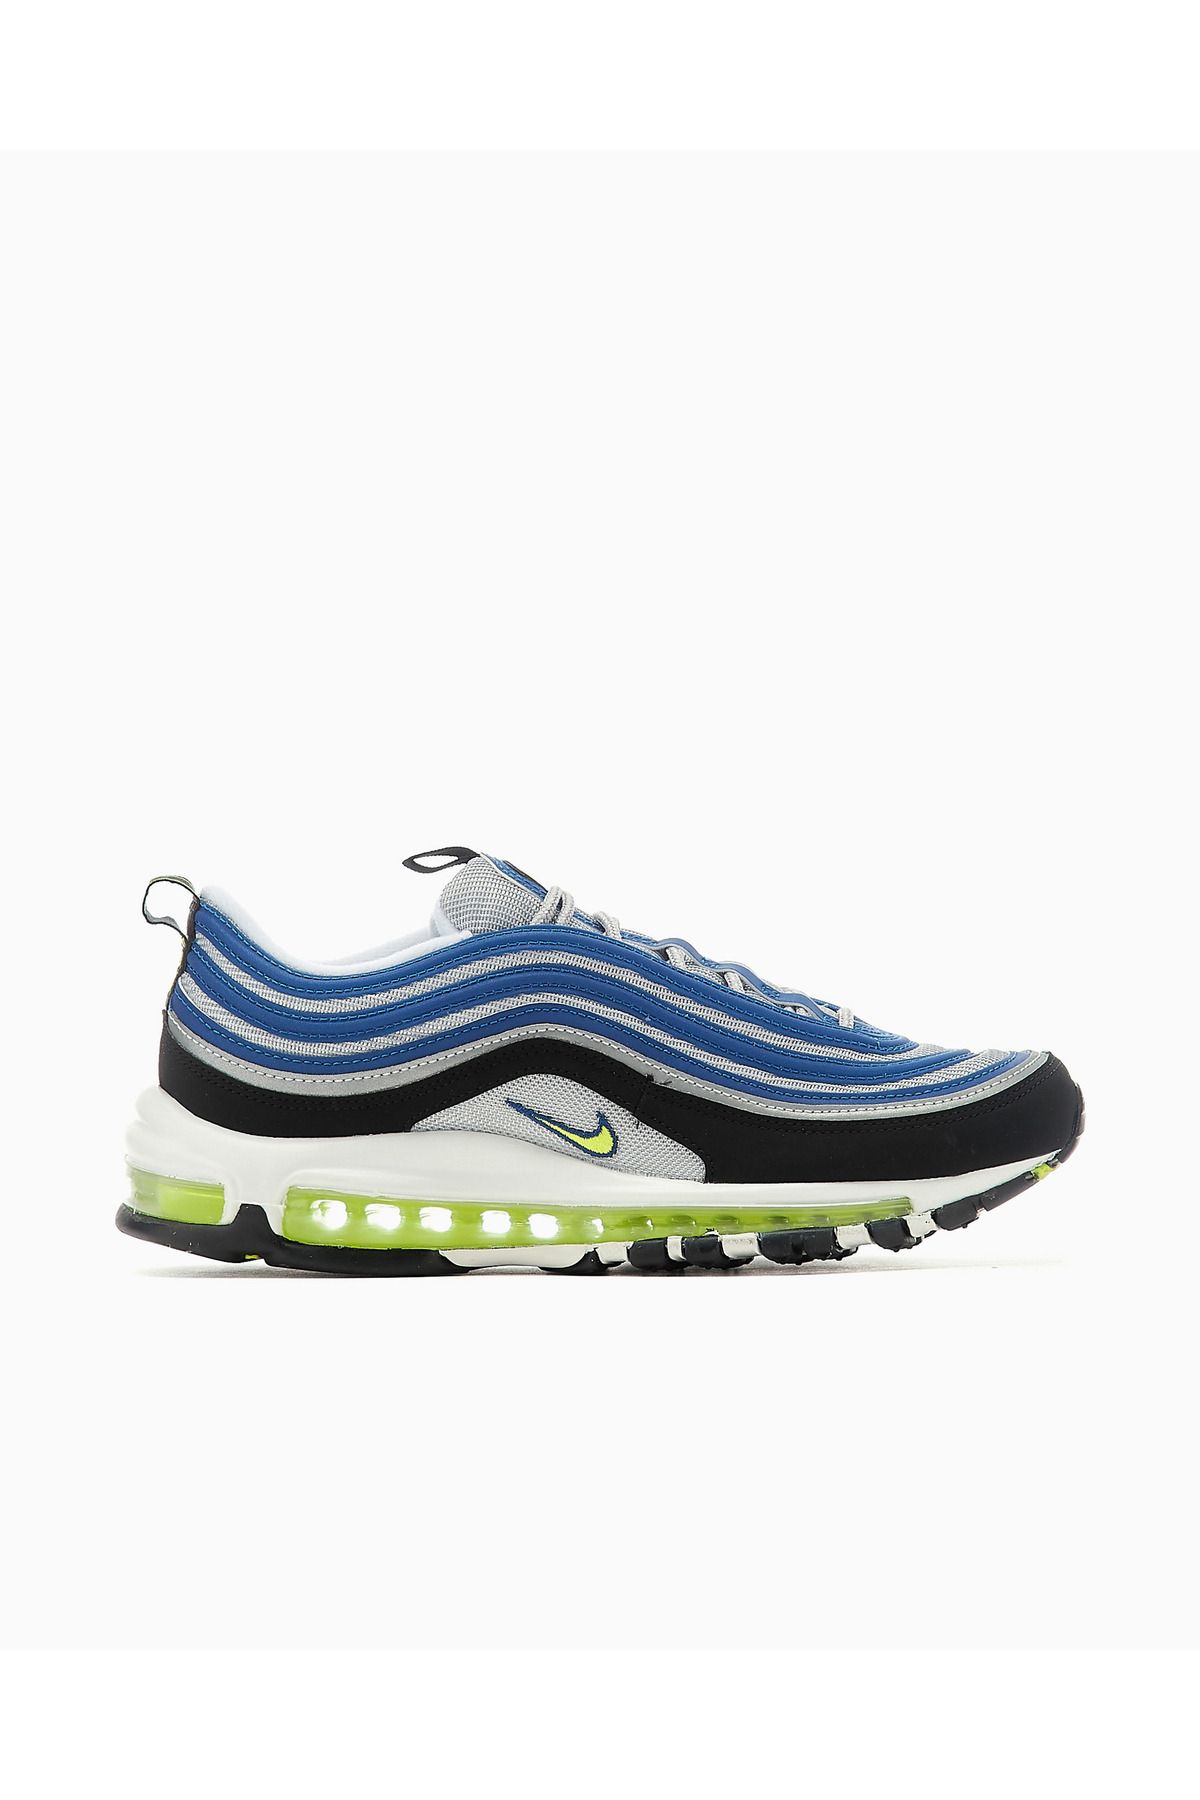 Nike Air Max 97 Atlantic Blue and Voltage Yellow